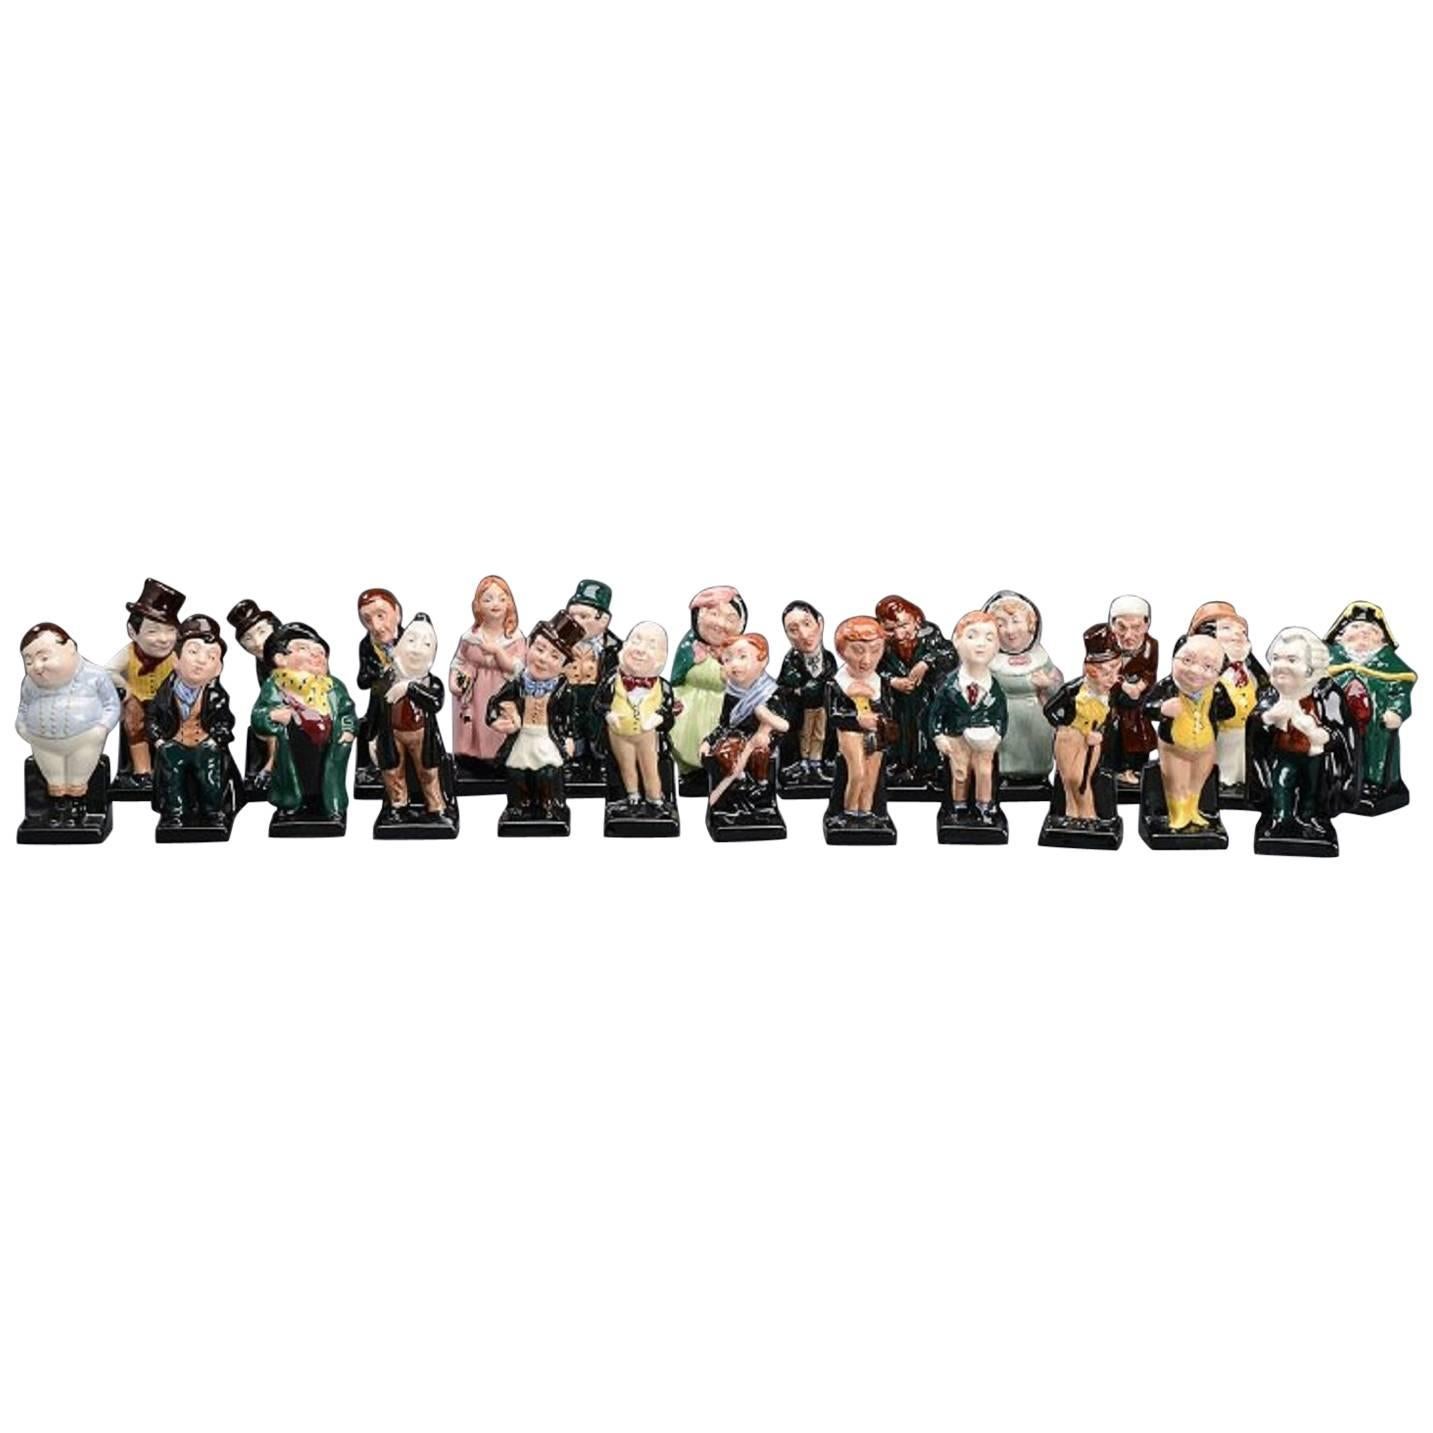 24 Charles Dickens Figures from Royal Doulton